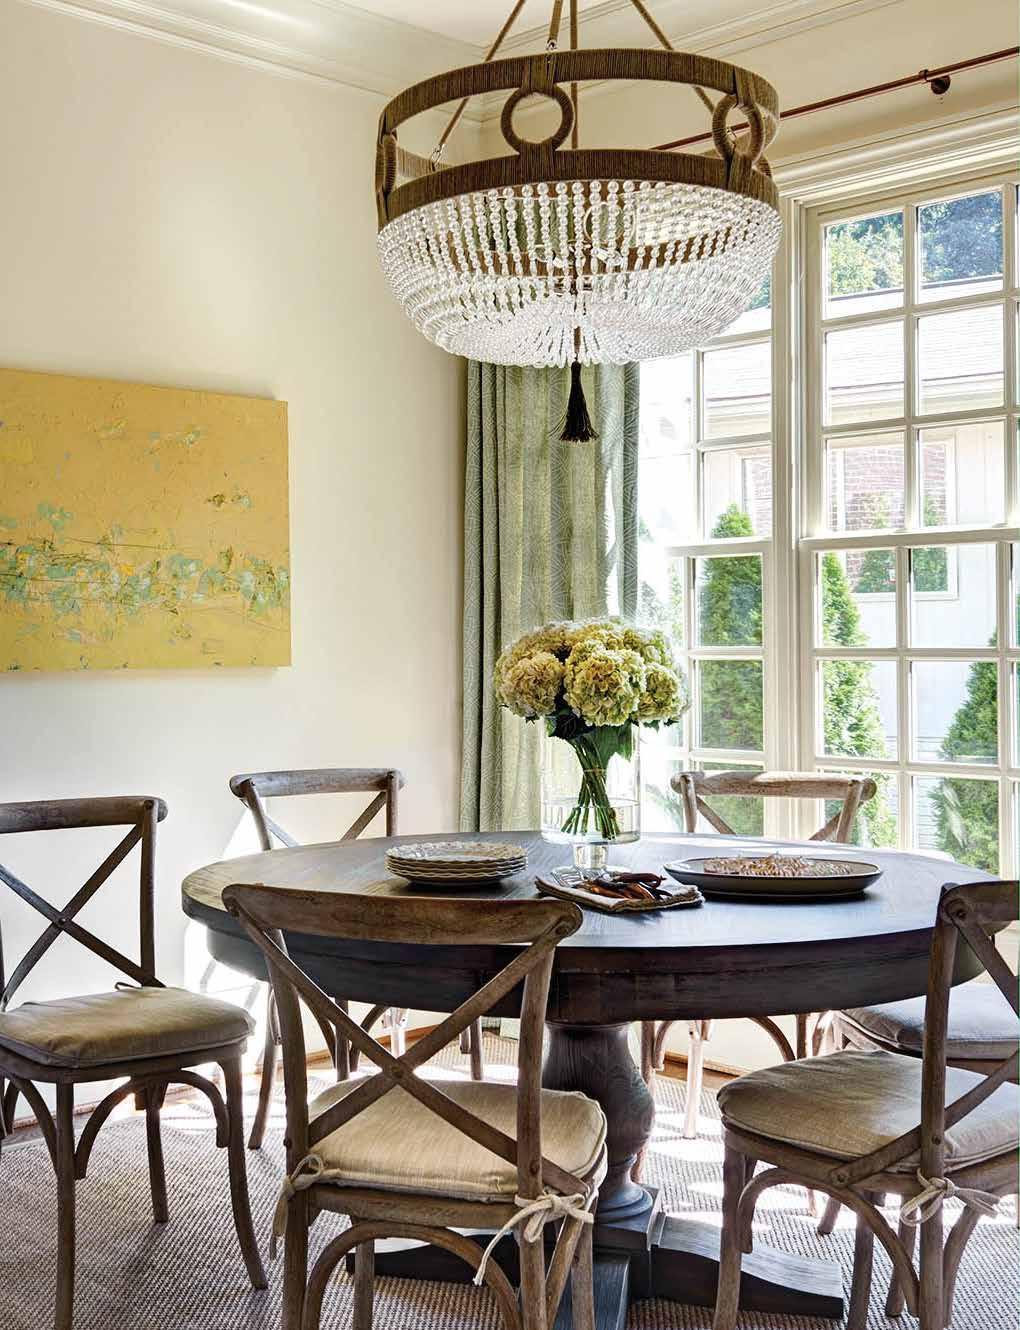 The homeowner just wanted the room to be light and bright, says Zeller of the breakfast nook.